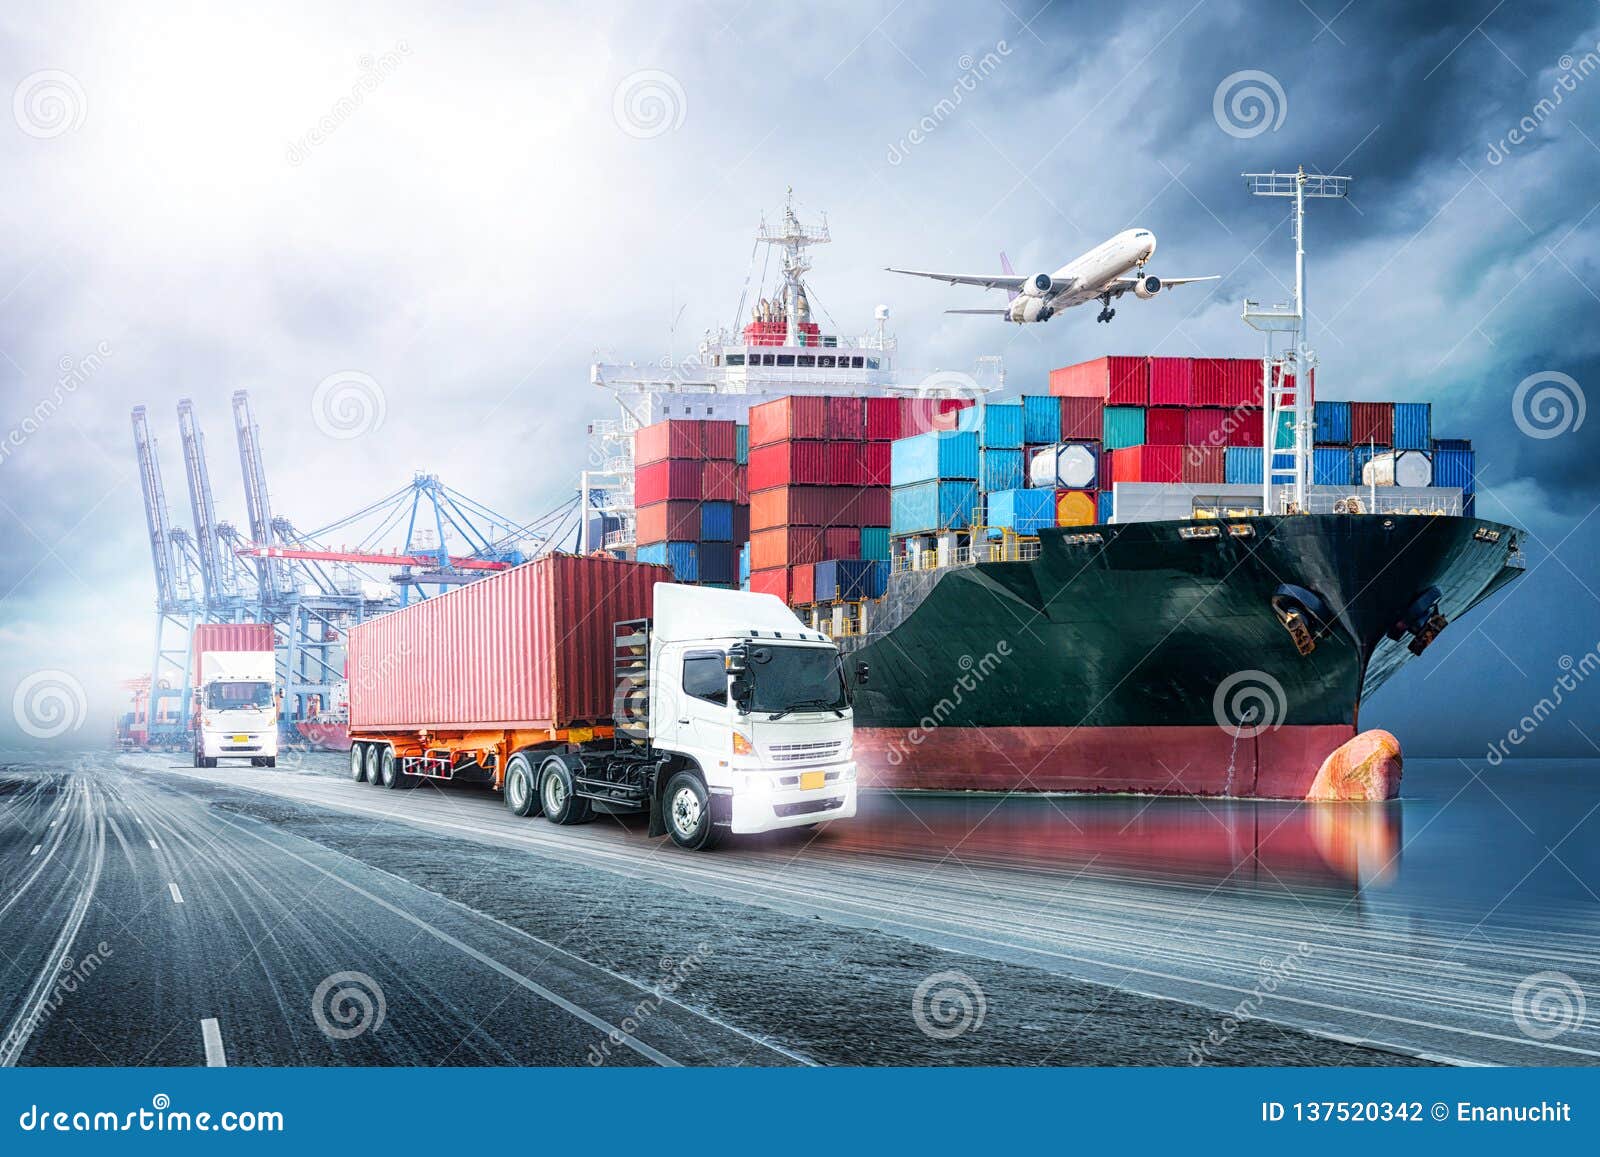 Logistics Import Export Background and Transport Industry of Container  Cargo Freight Ship Stock Photo - Image of concept, industrial: 137520342